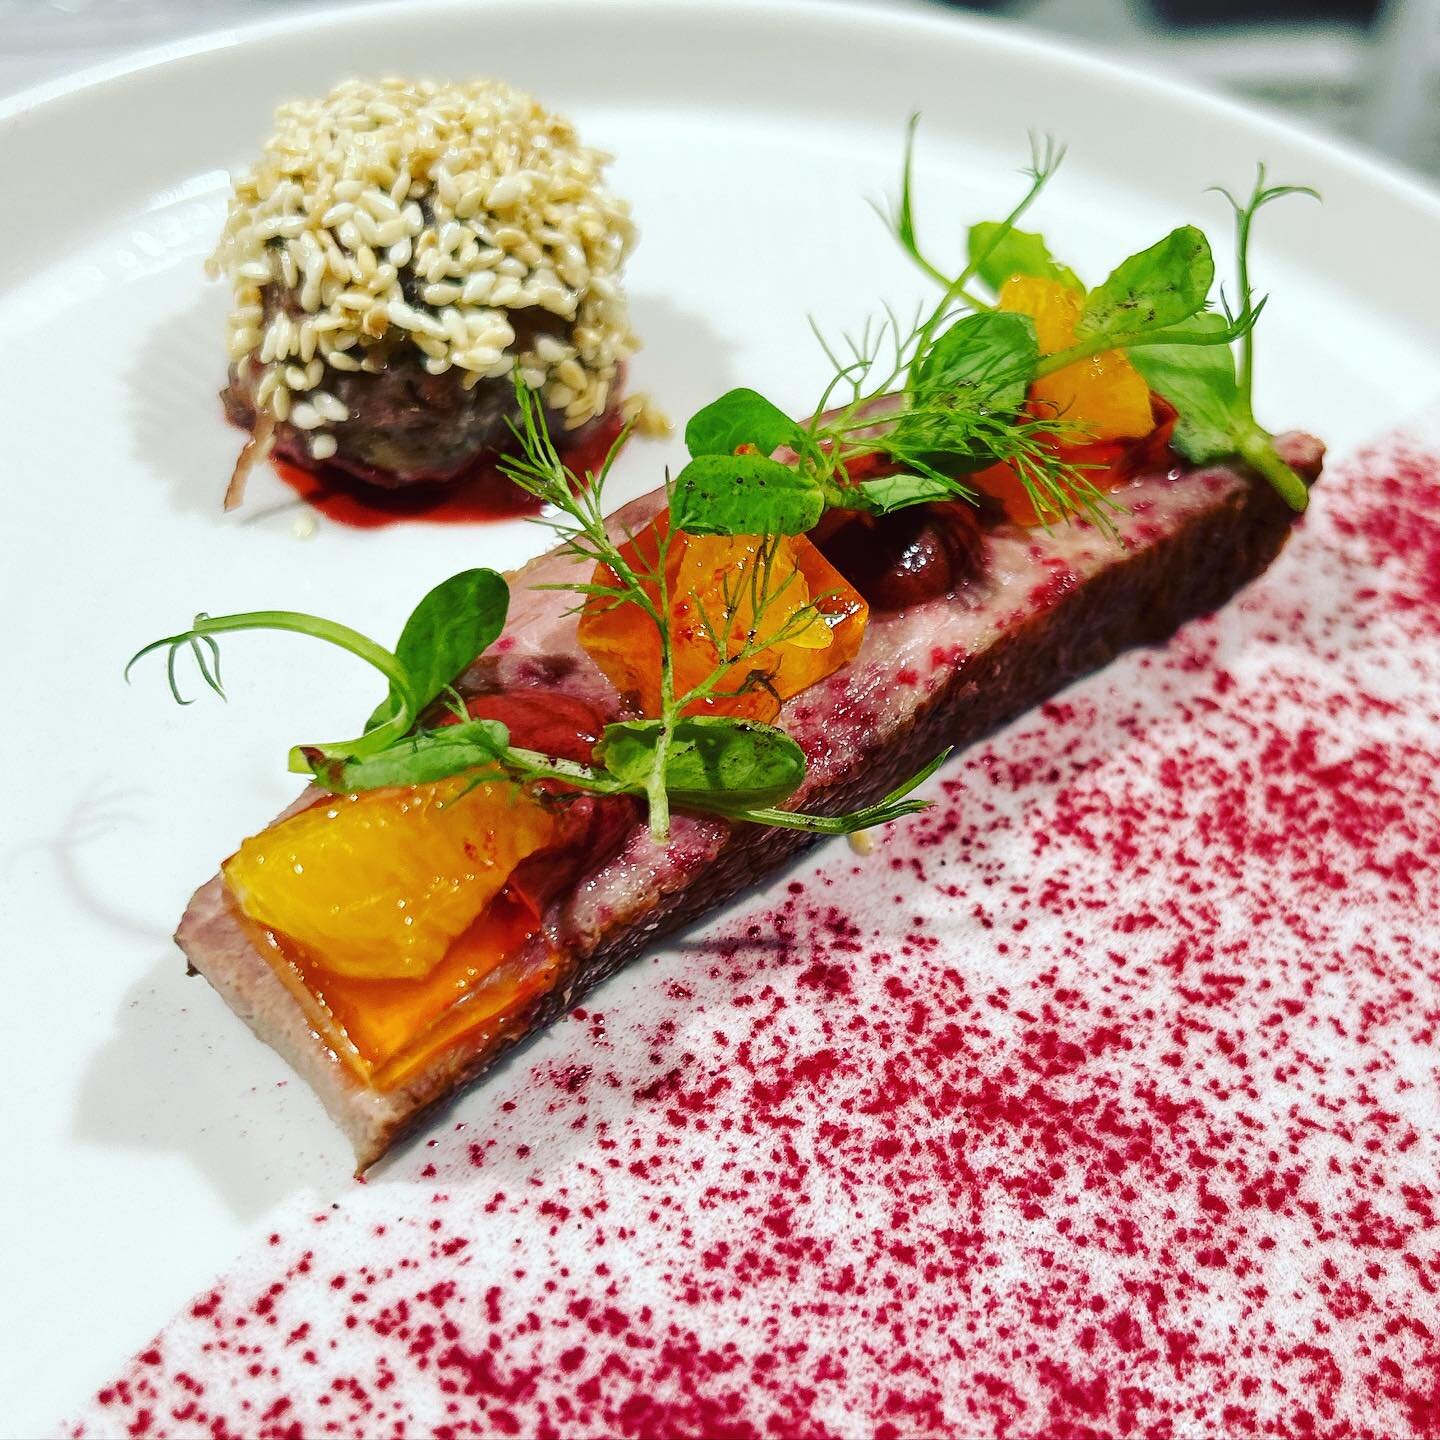 A few dishes from this week, @blackmountainssmokery smoked Duck breast, confit leg, toasted sesame, beetroot &amp; orange. Celtic King Scallops, belly Pork, Herefordshire apple. #rosettescatering #weddingfood #wedding #weddingcaterer #weddingcatering